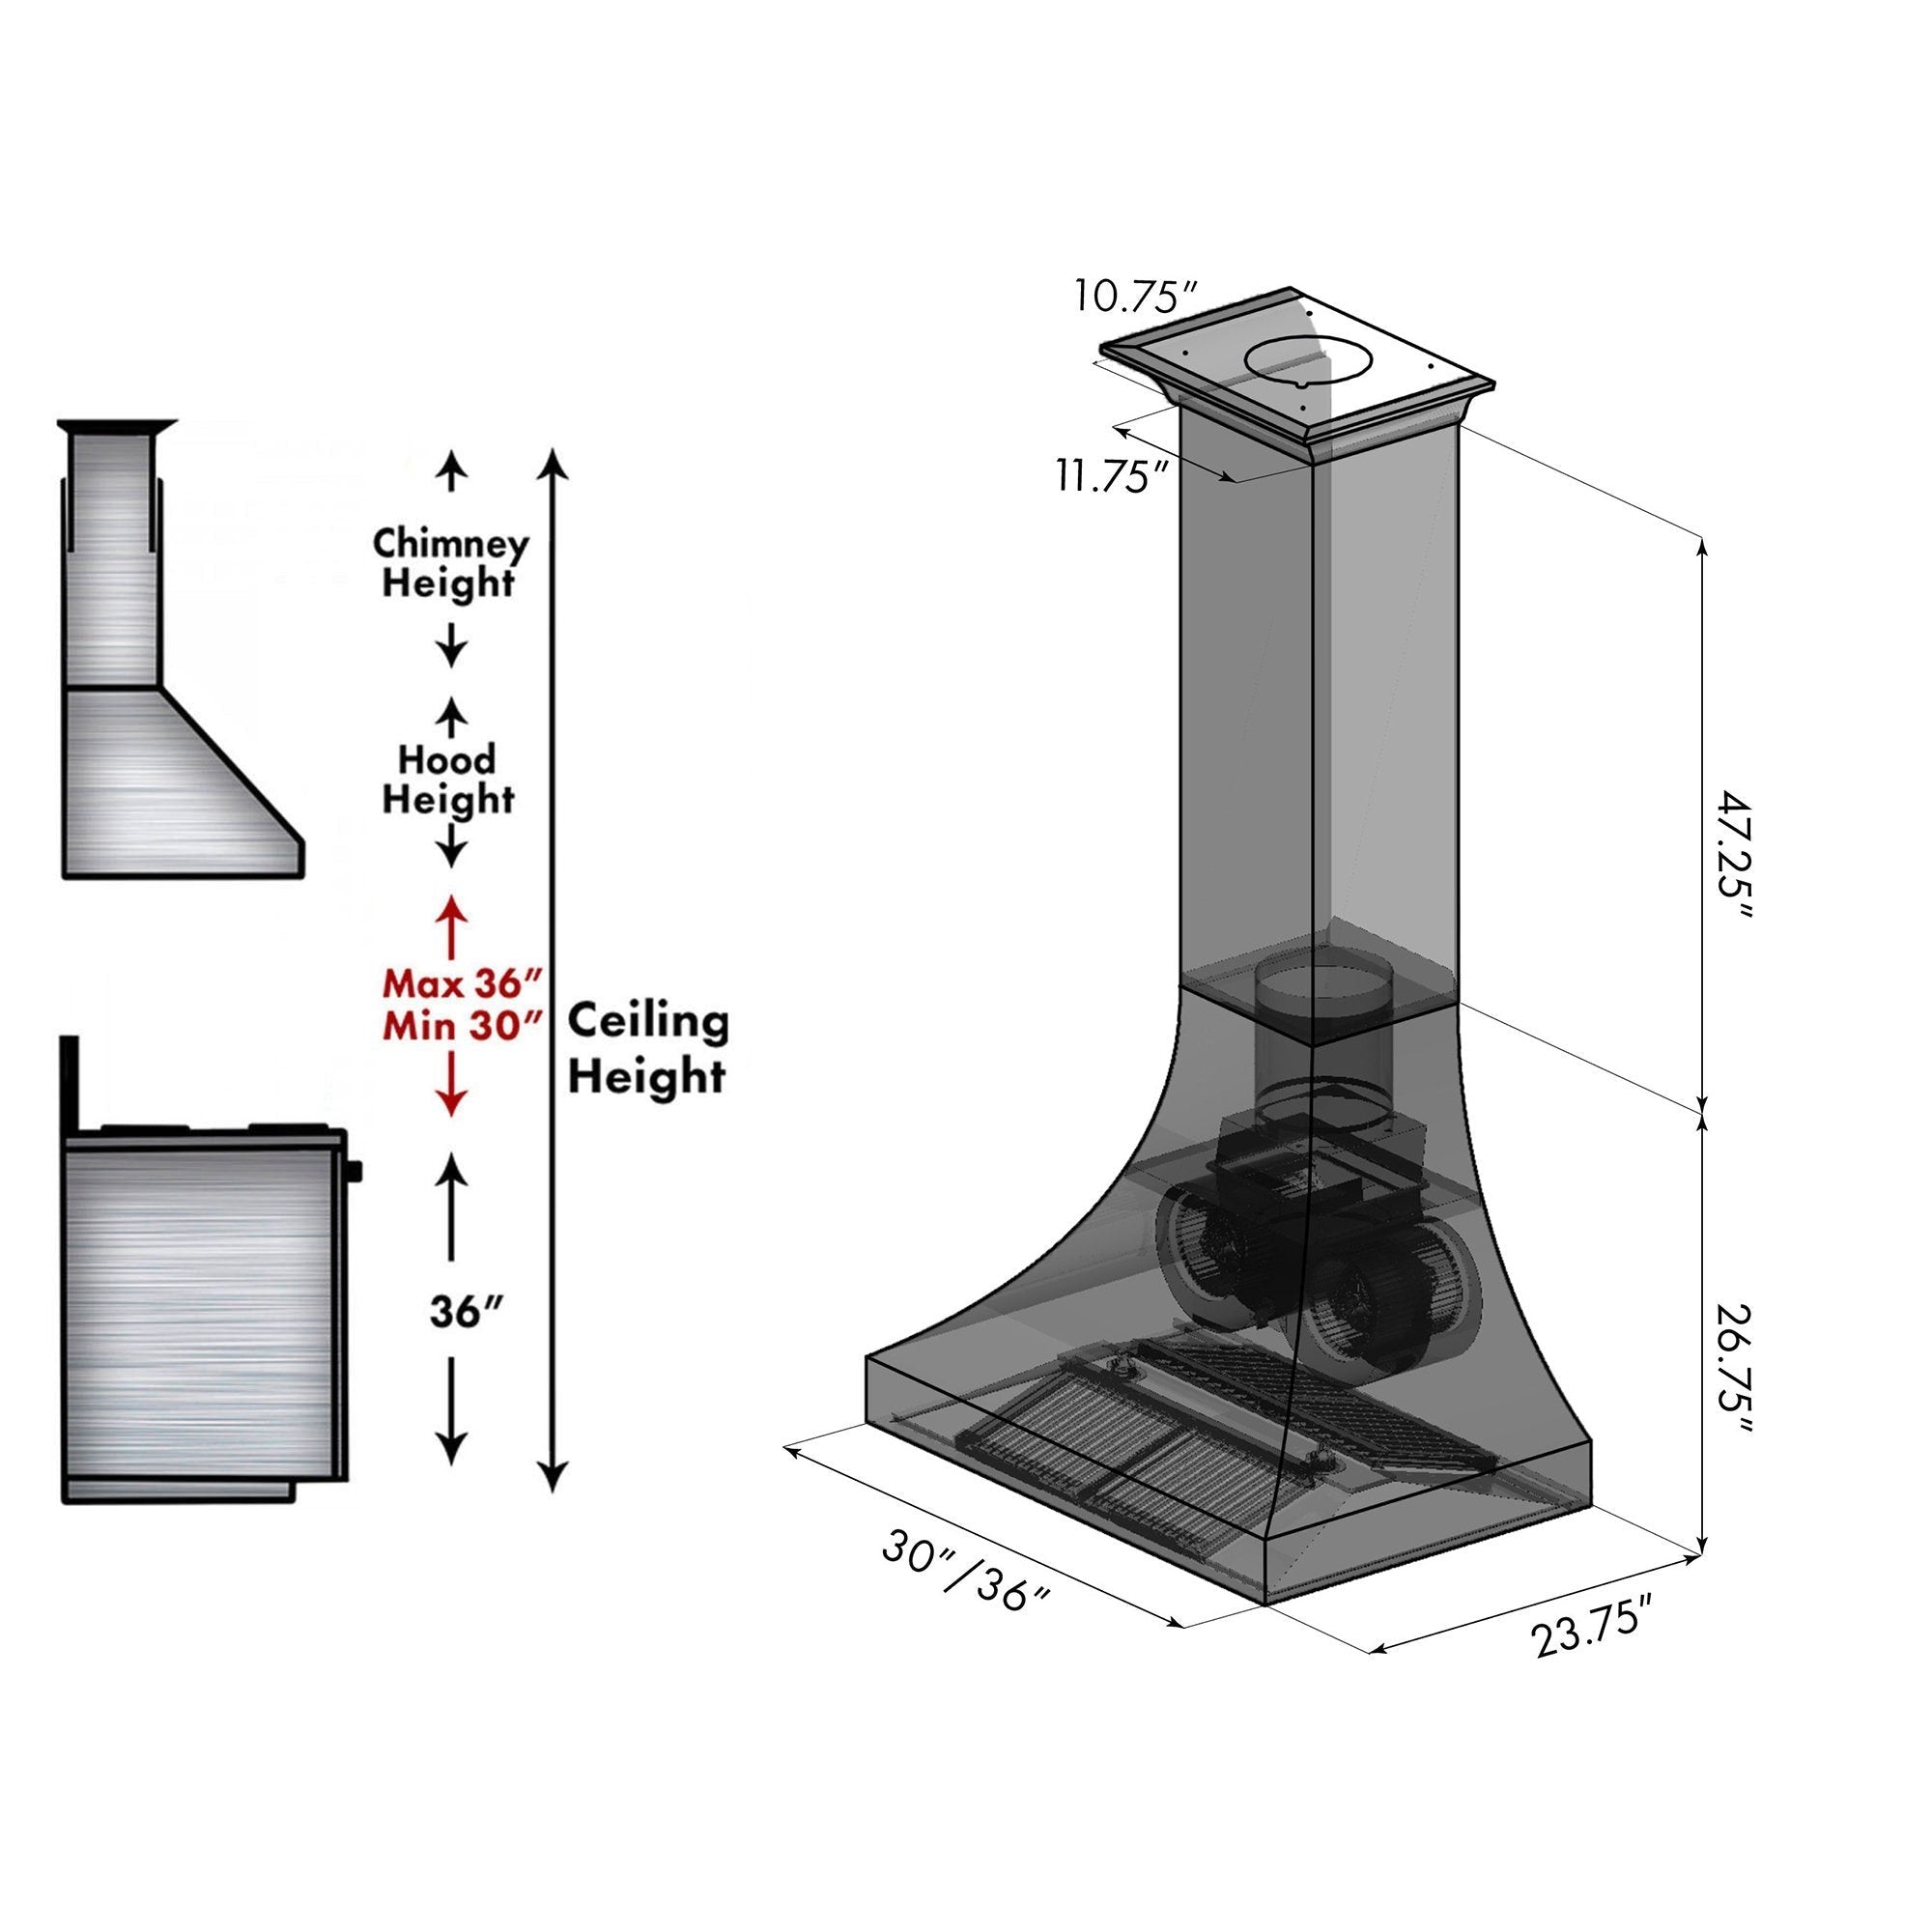 Dimensional diagram and chimney height guide.